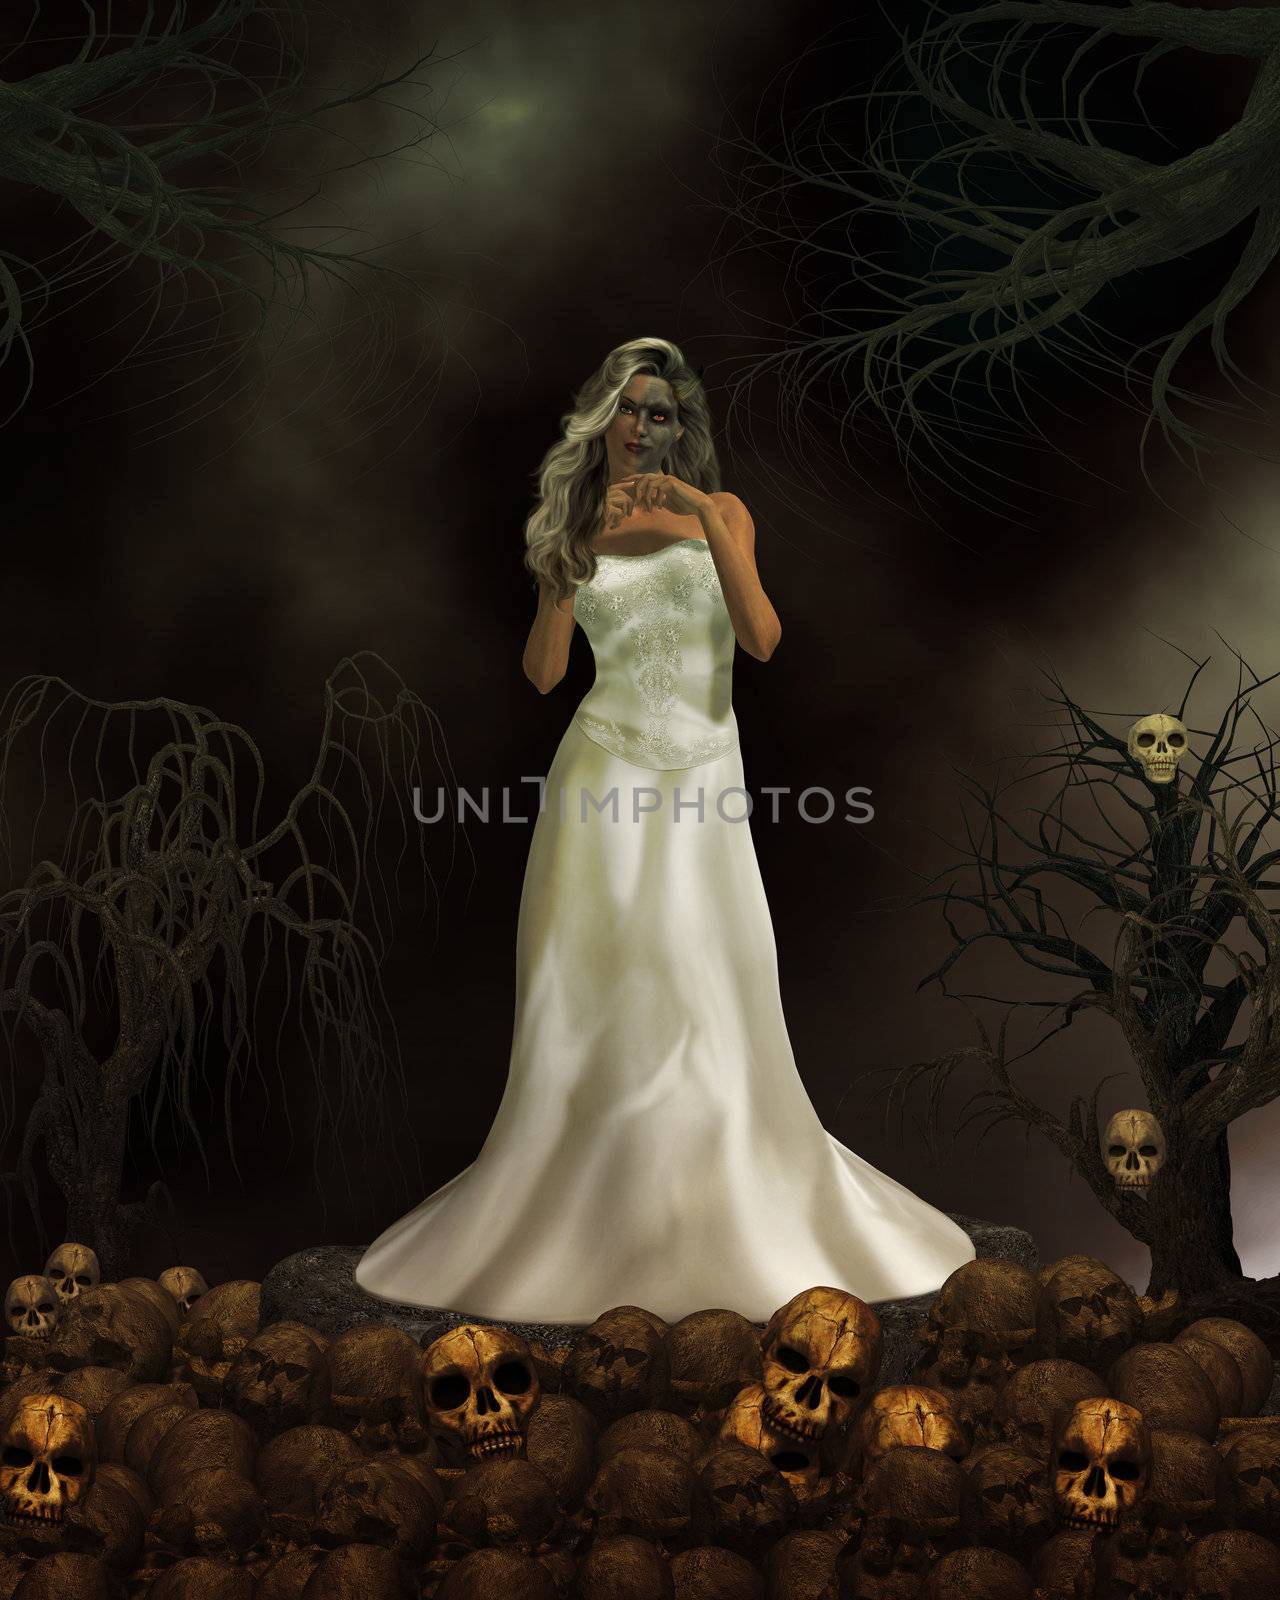 Female demon in wedding dress ready to get married again